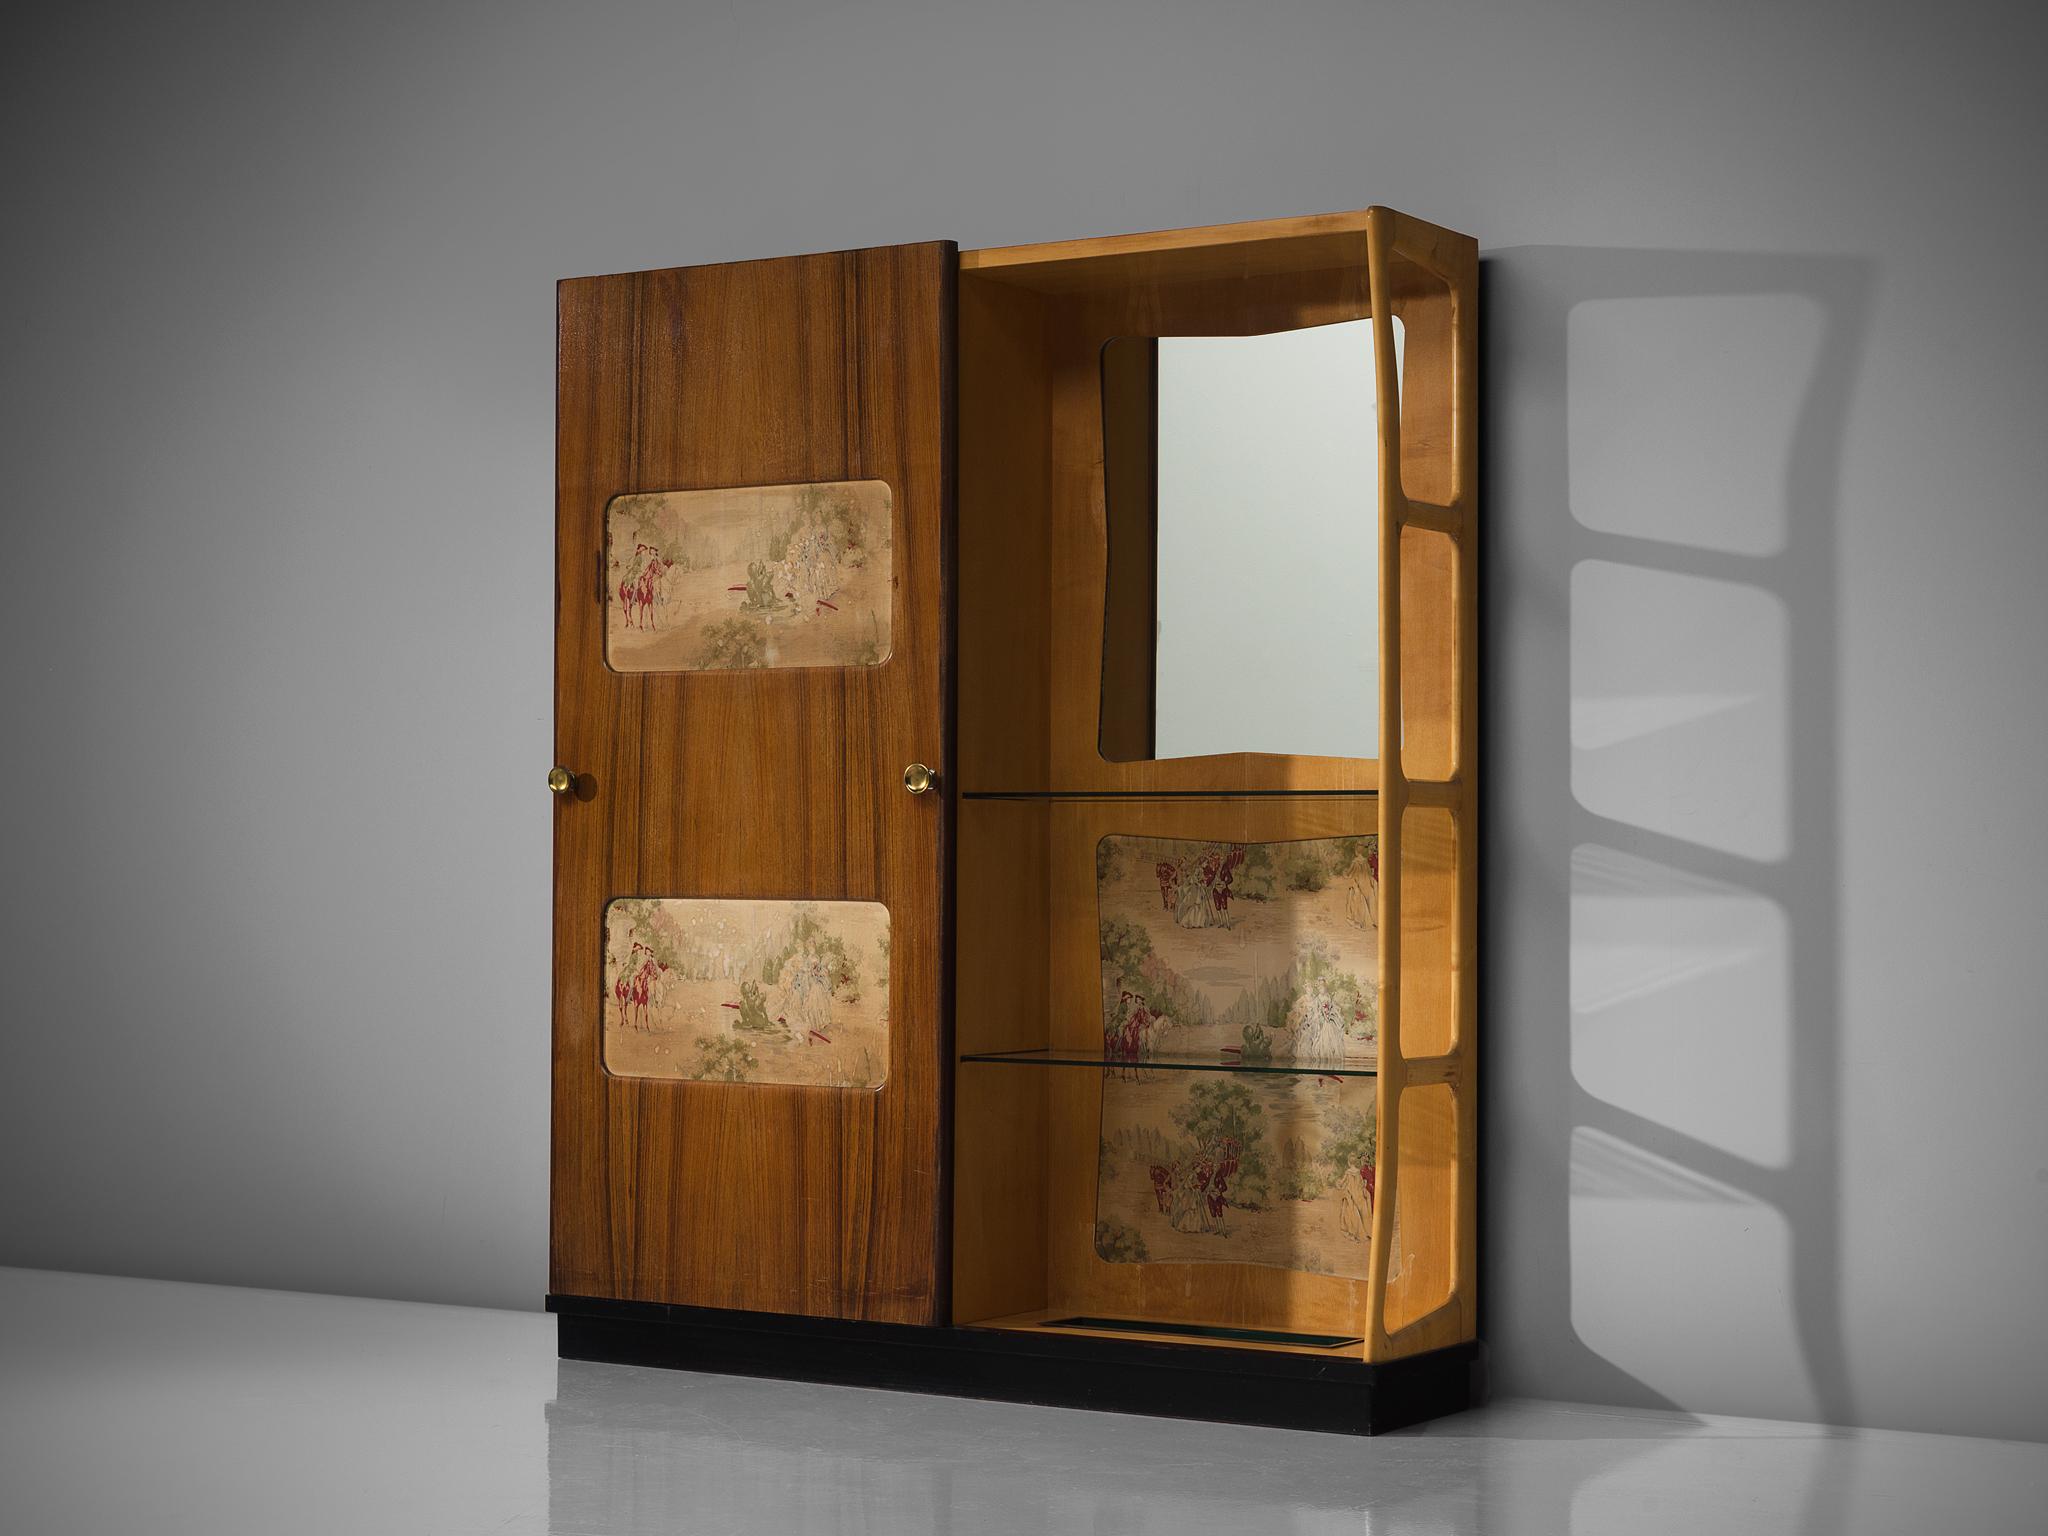 La permanente Mobile Cantu, wardrobe, wood, silk, Italy, 1950s.

Very special and typical Italian wardrobe manufactured by La permanente Mobile Cantu. The piece shows great elegance. A sliding door either hides the illuminated wardrobe with three